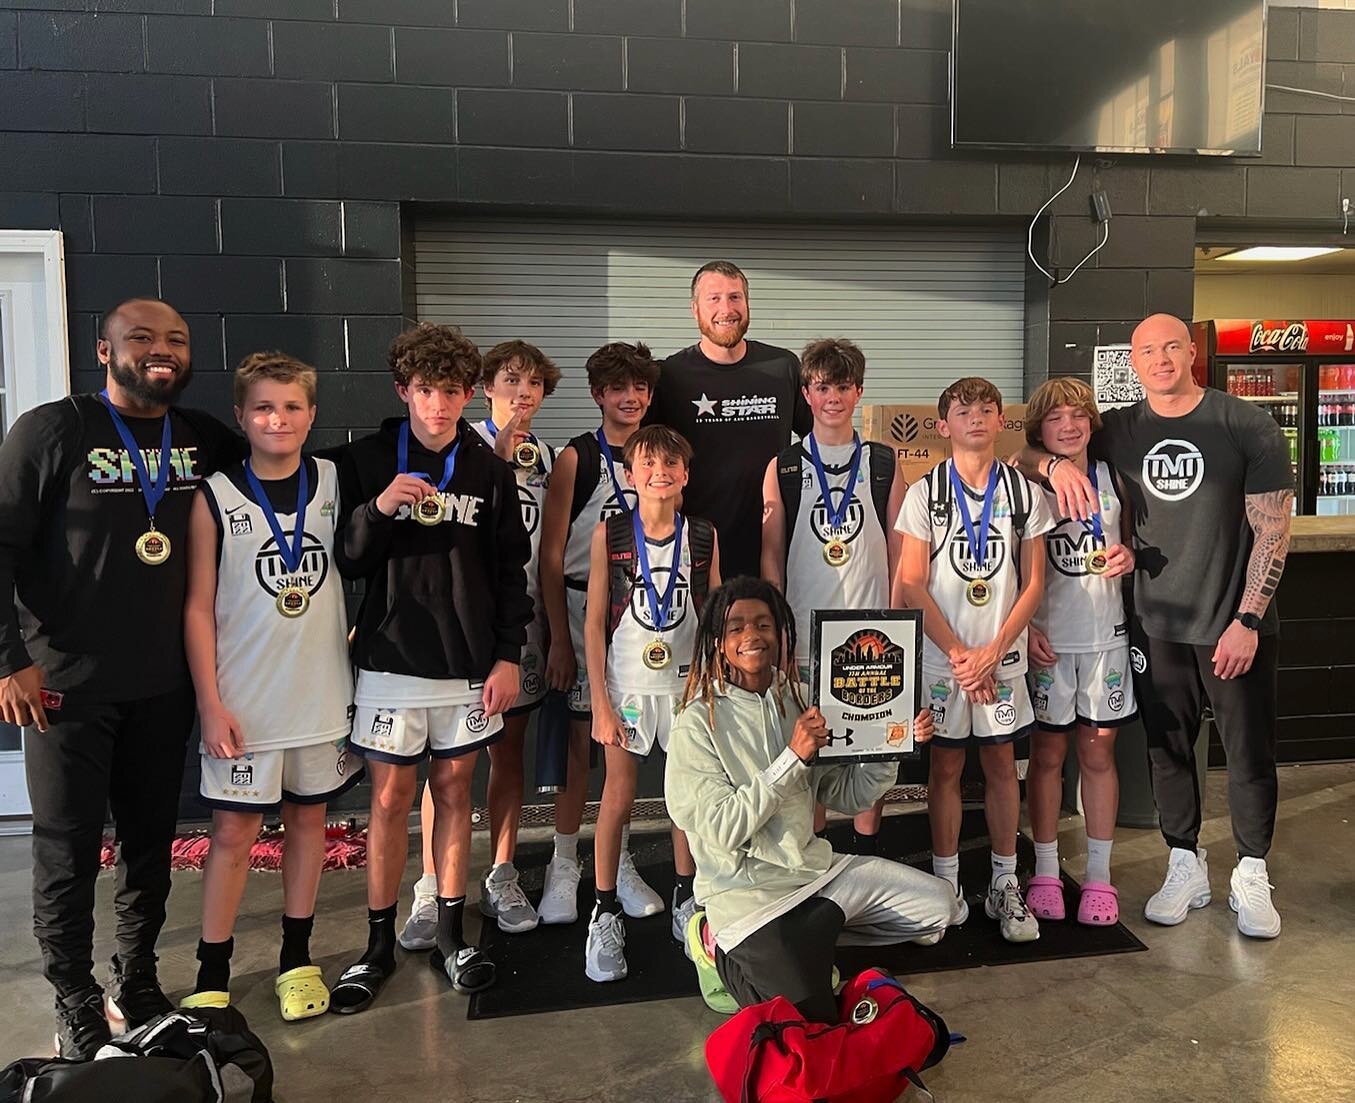 Finished off our Fall AAU season on a high note! 🏆 Seeing each of these guys work hard to consistently improve each week going into their winter hoop seasons has been great!